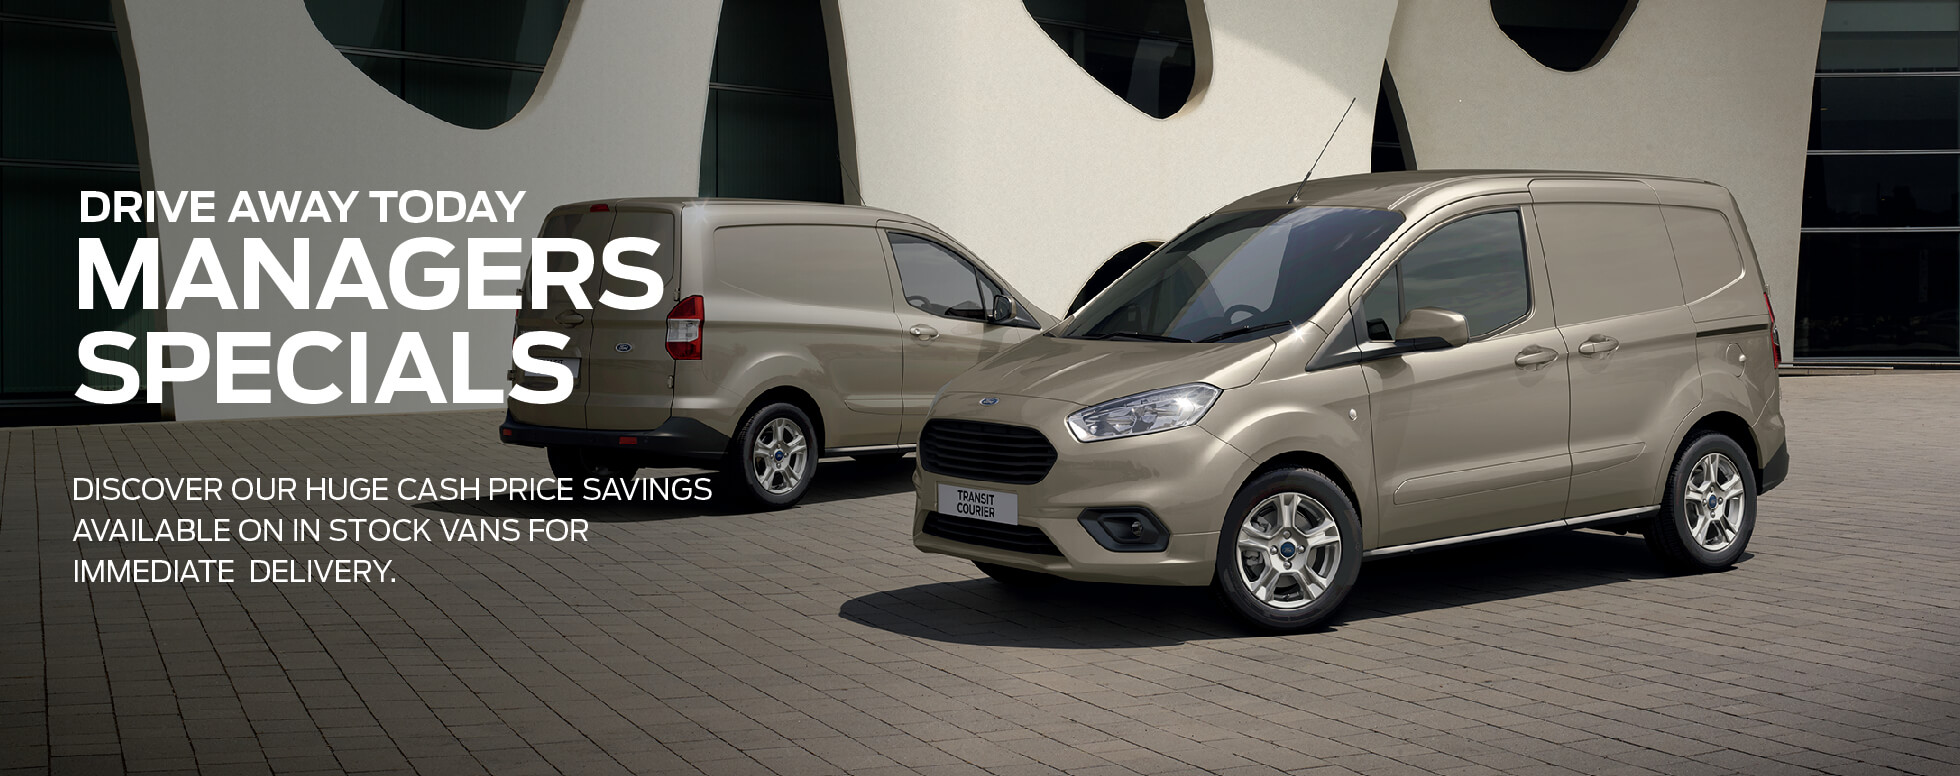 Ford Van Manager Specials